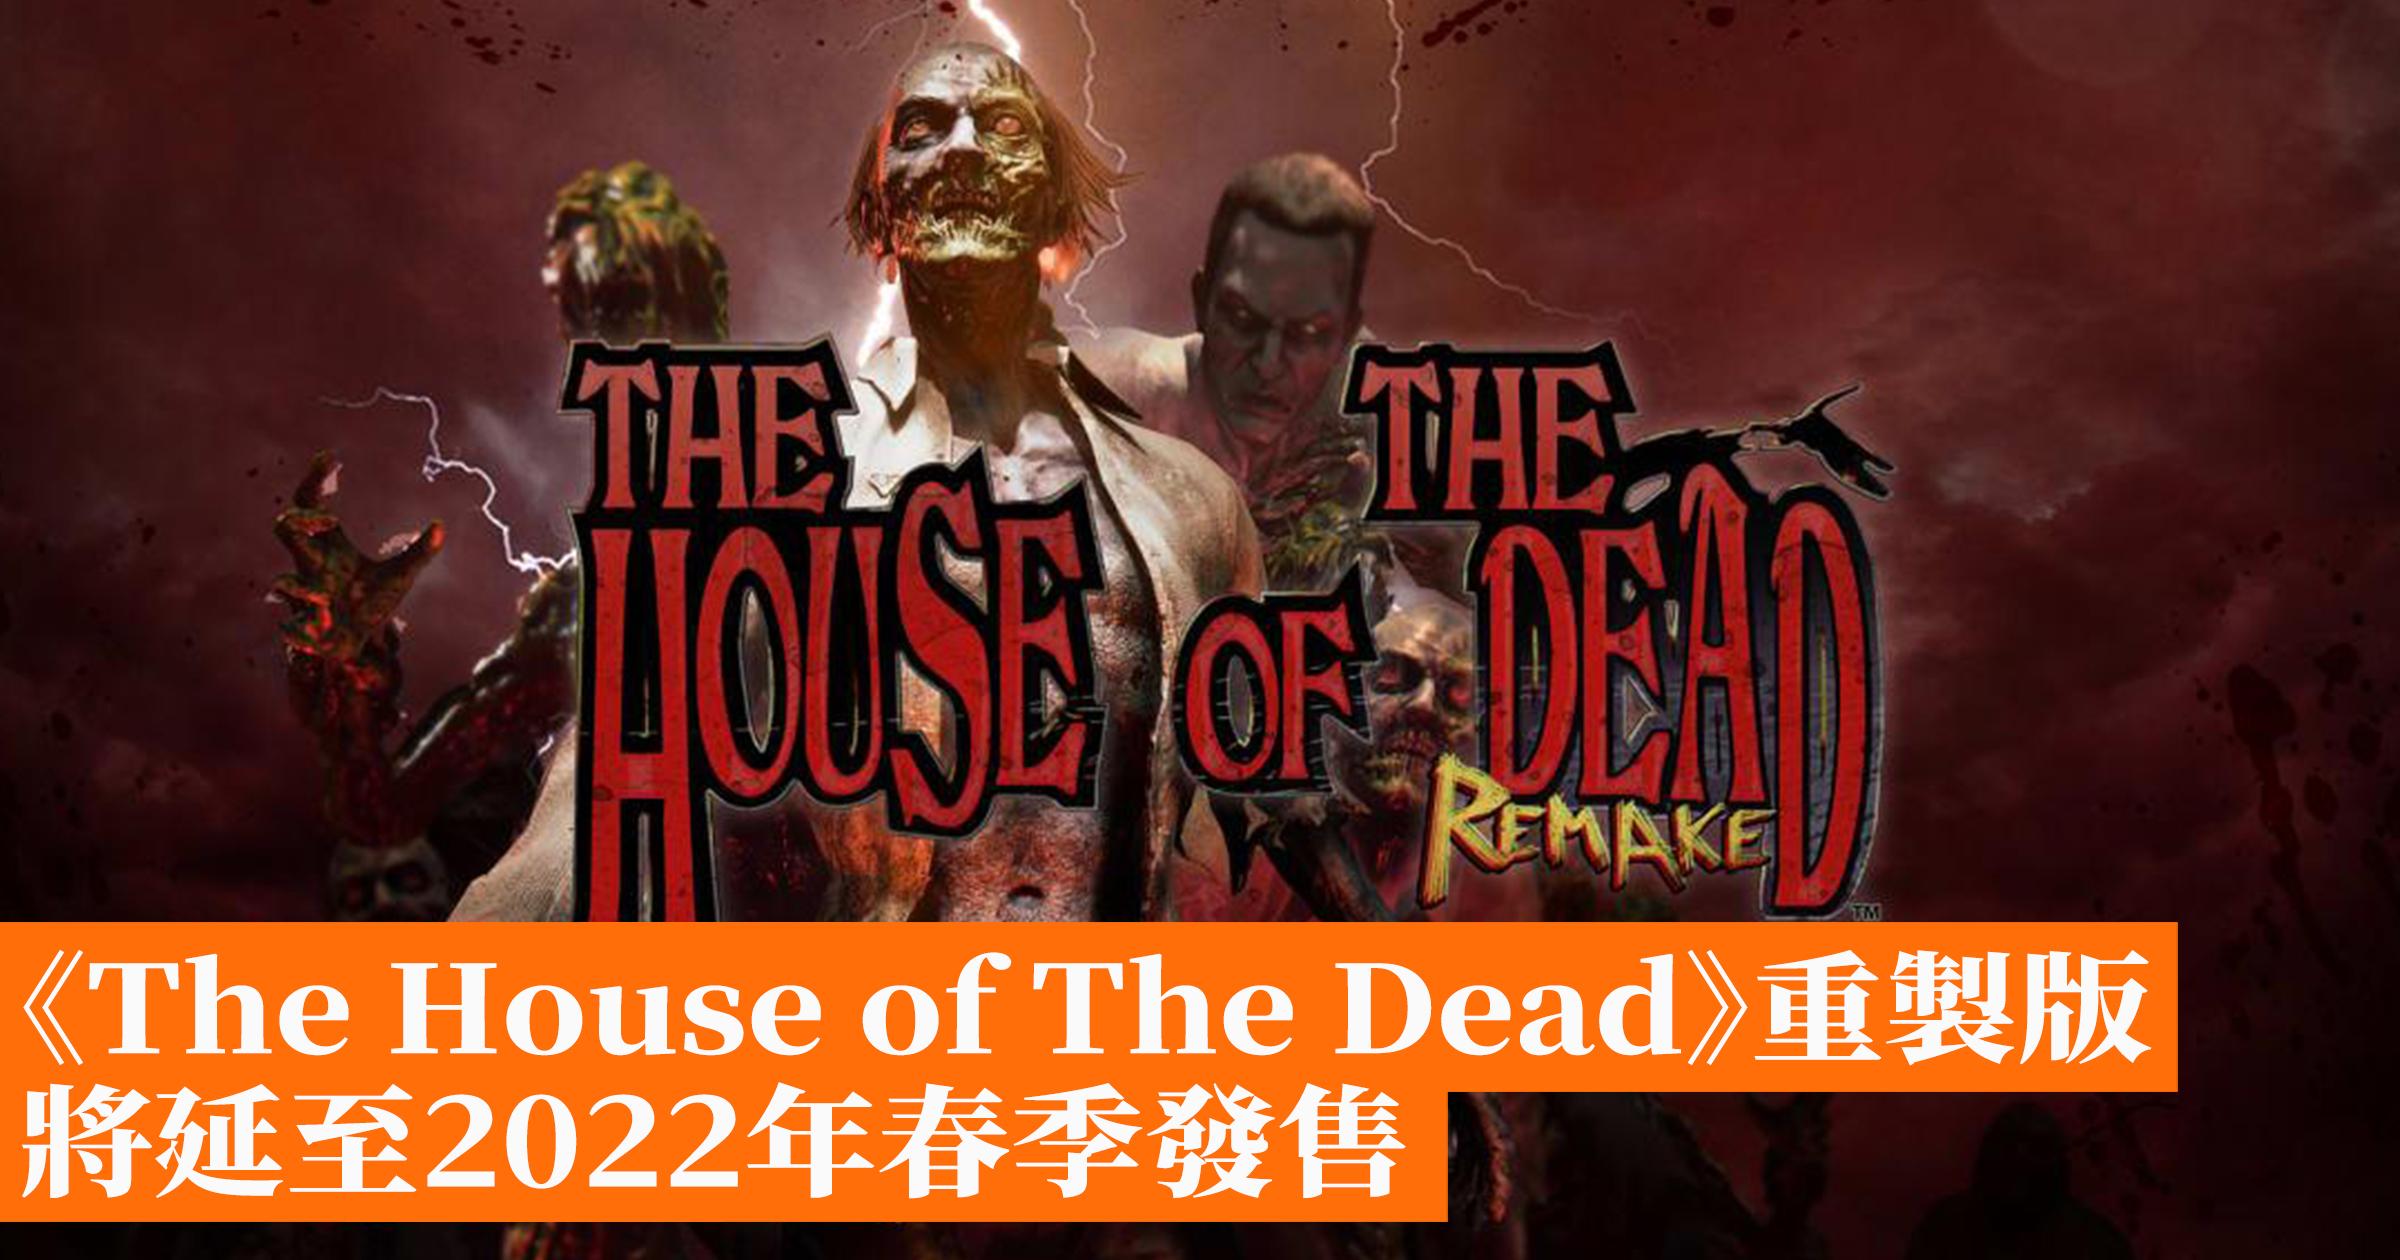 the-house-of-the-dead-iii-images-launchbox-games-database